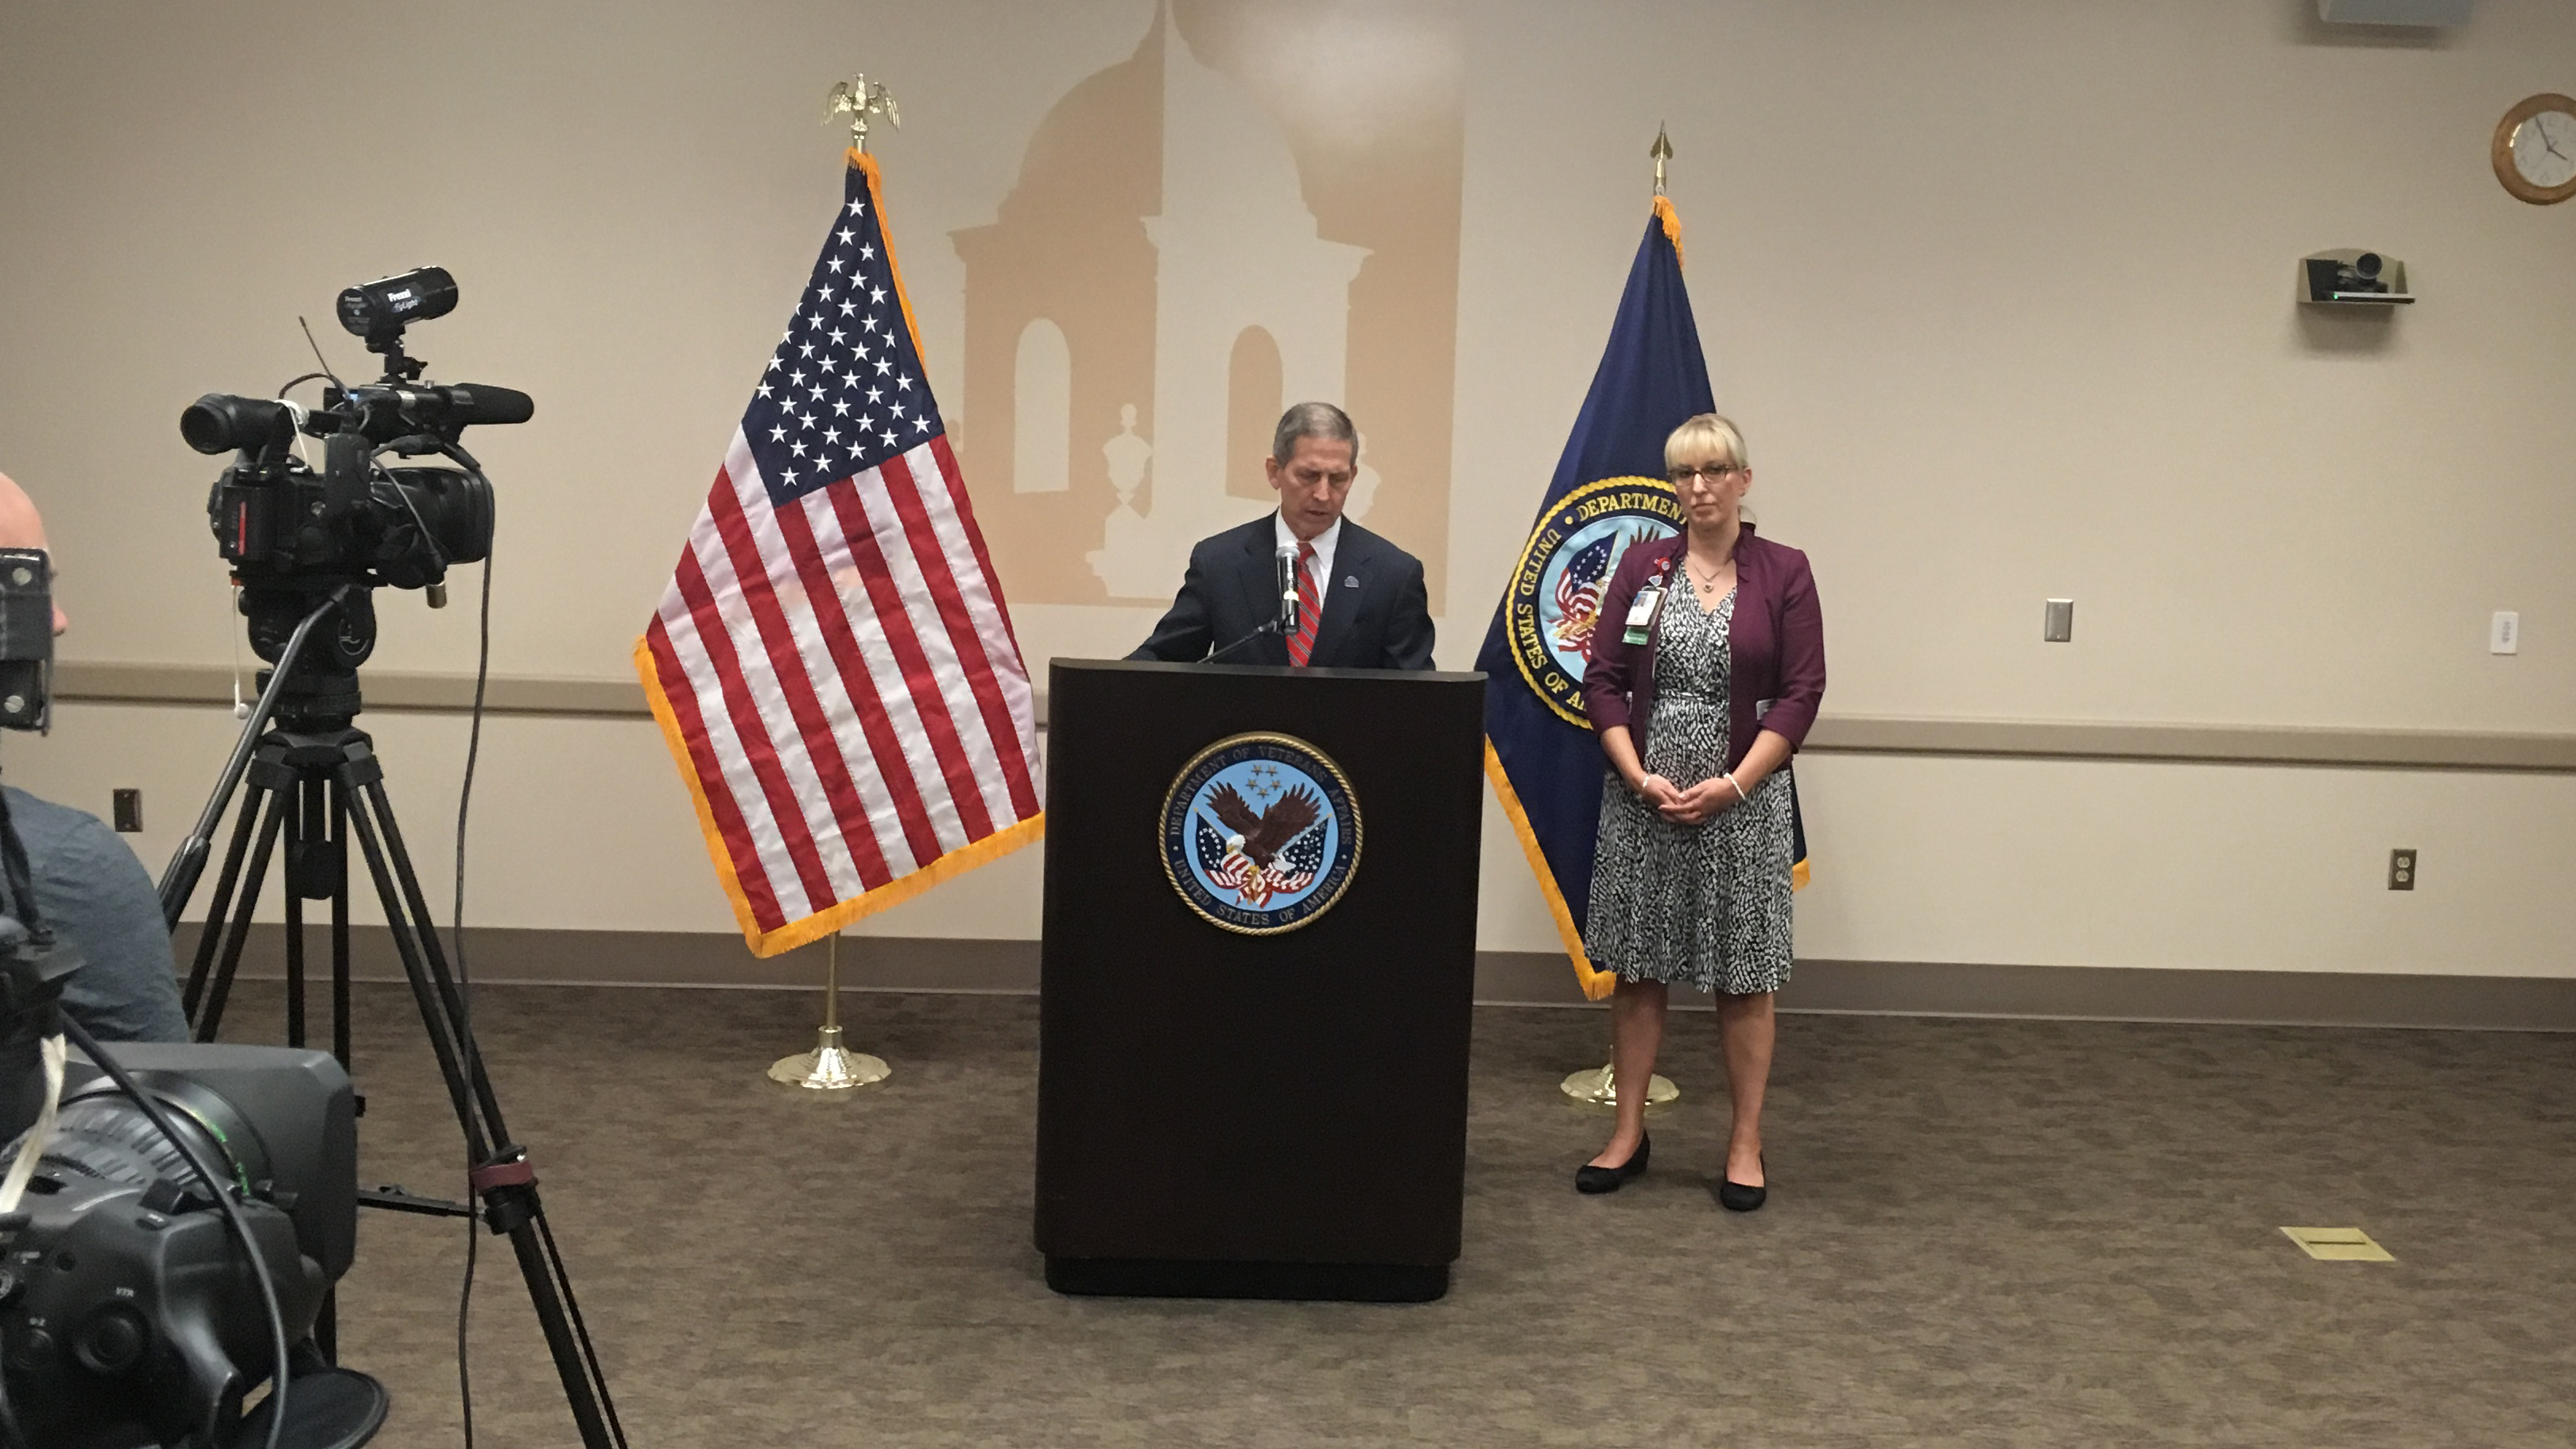 Deputy Secretary of the U.S. Department of Veterans Affairs Sloan Gibson visits the VA facility in Tucson.  December 12, 2016